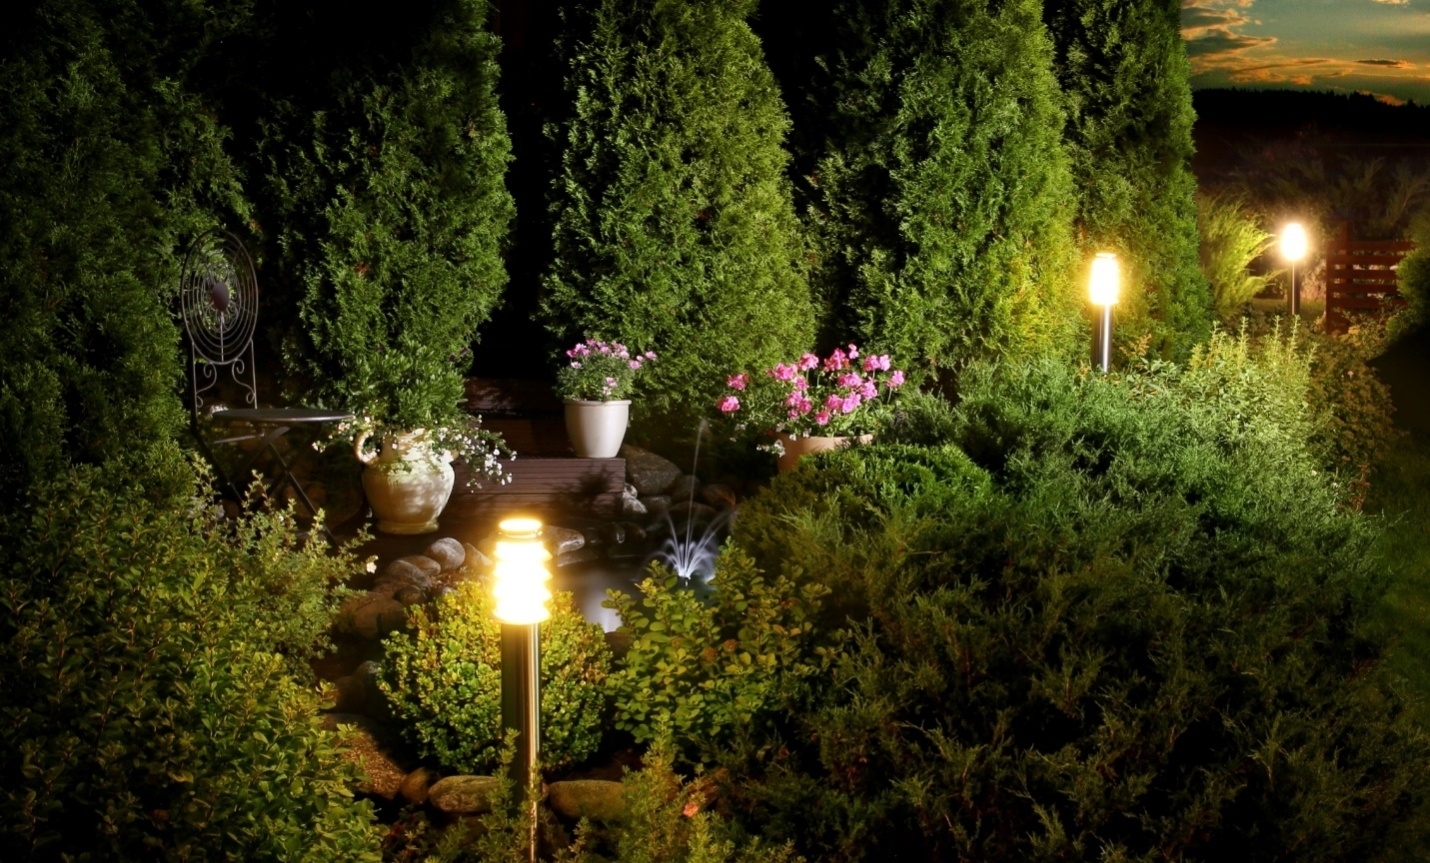 Outdoor lights turned on at night.